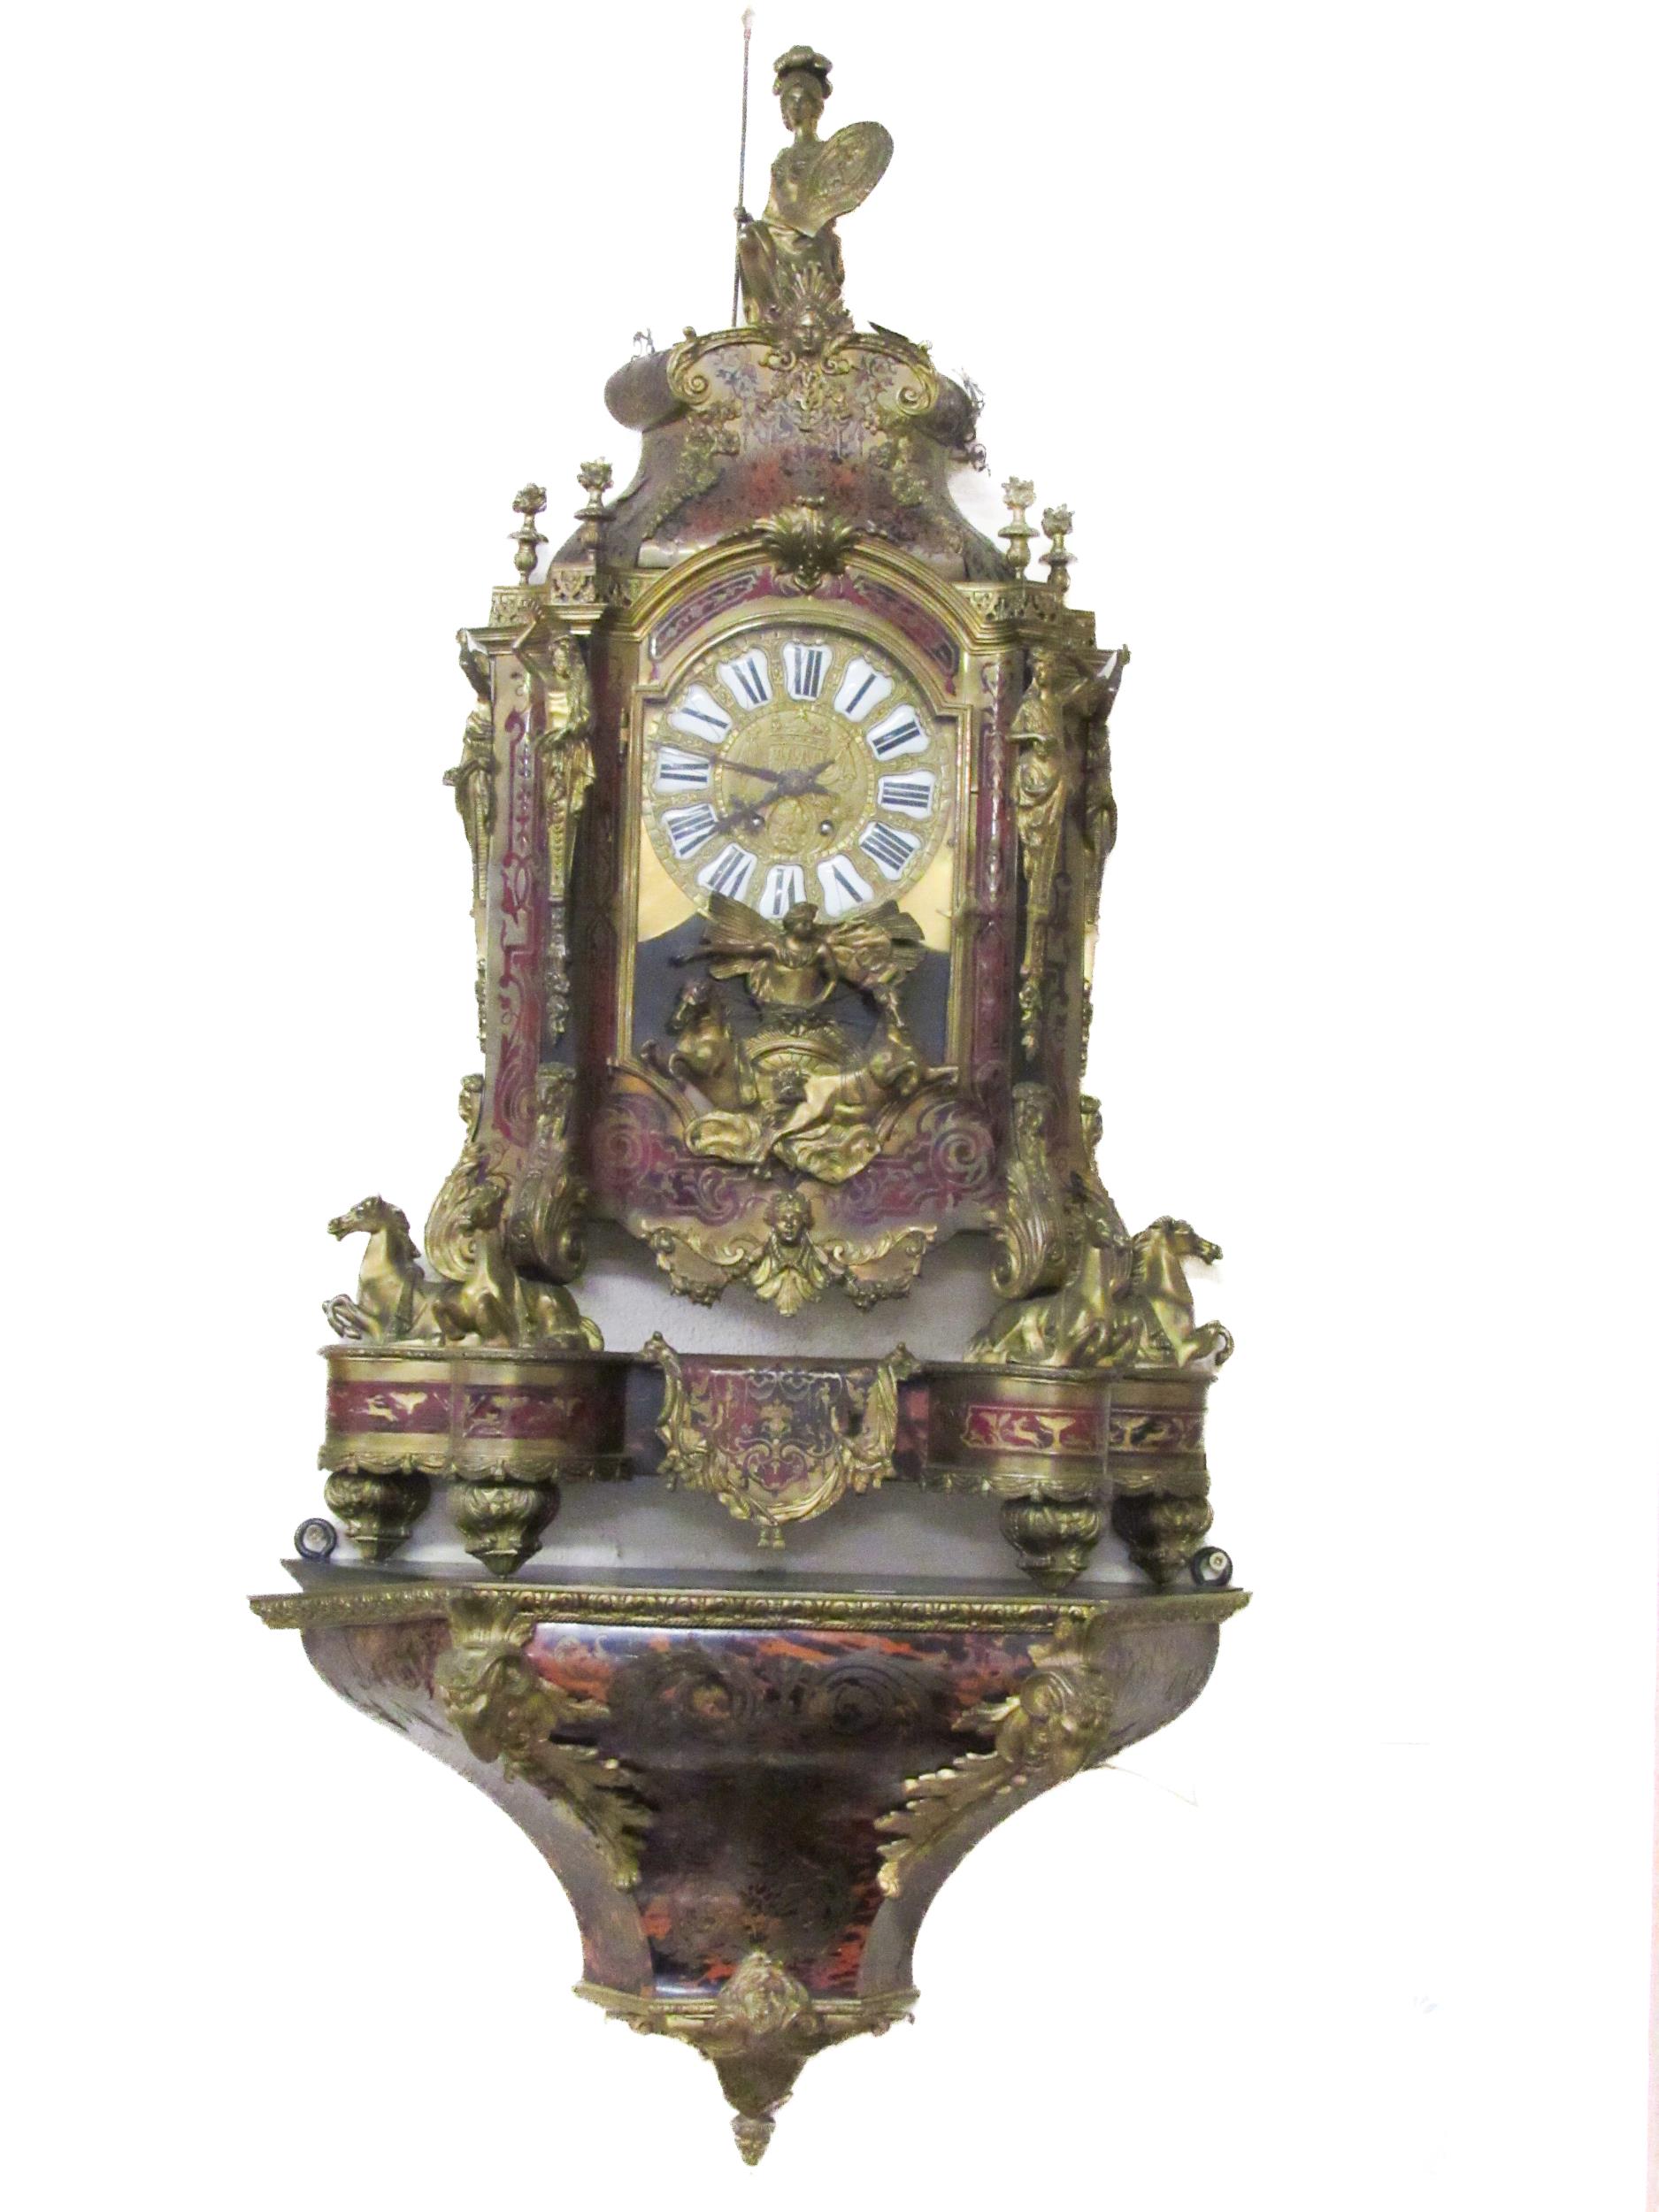 A fine quality 19th Century Louis XVI style French Boulle Bracket Clock, the top surmounted with a